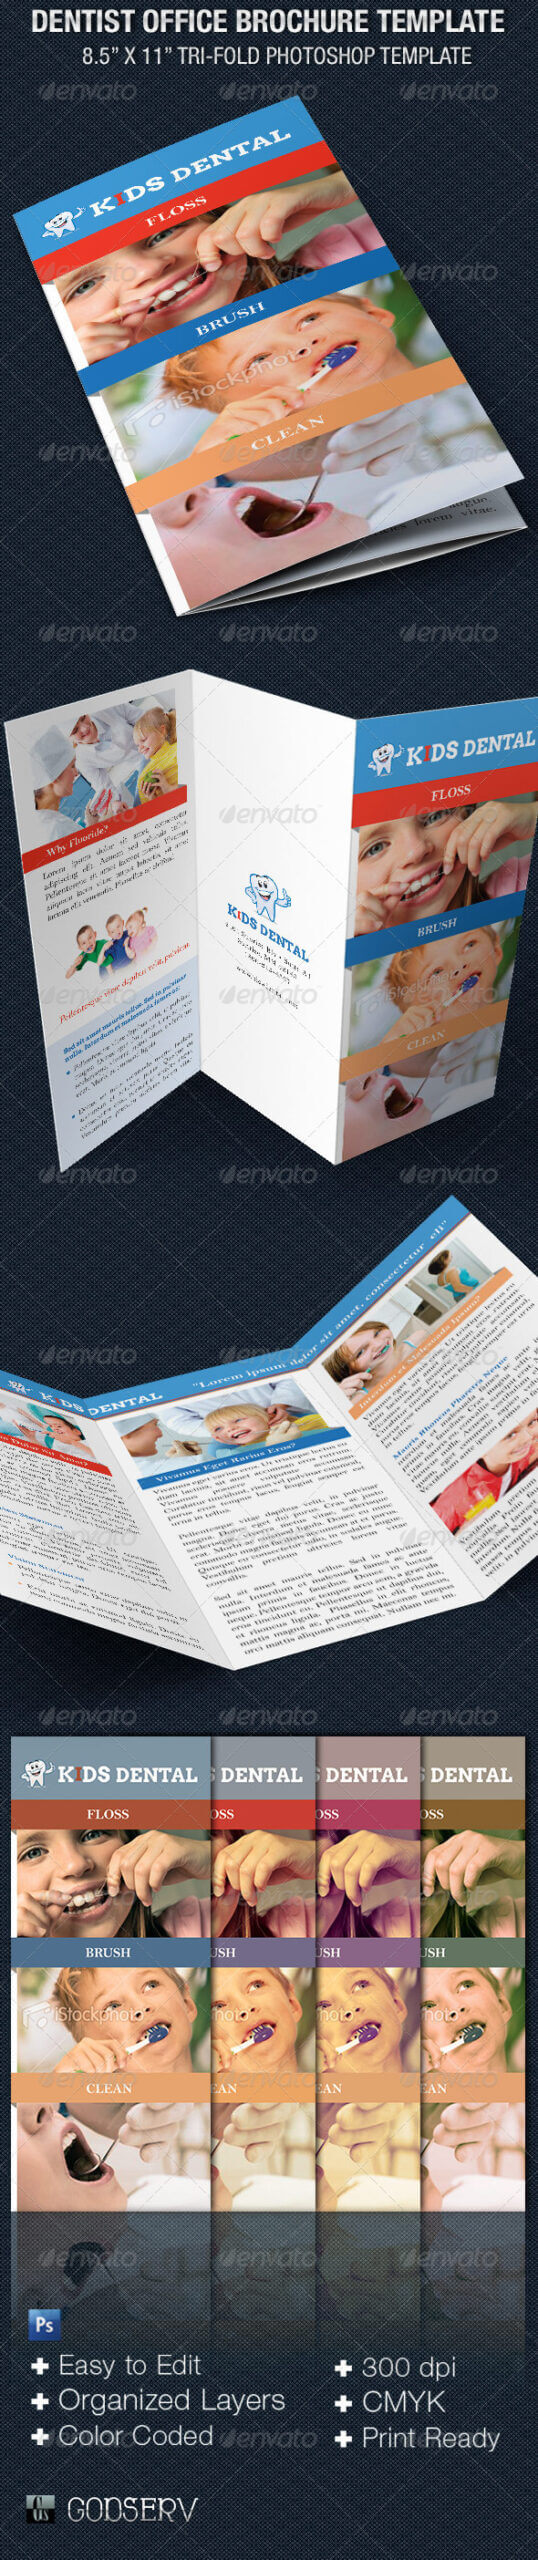 Medical Trifold Simple Graphics, Designs & Templates (Page 5) Intended For Medical Office Brochure Templates